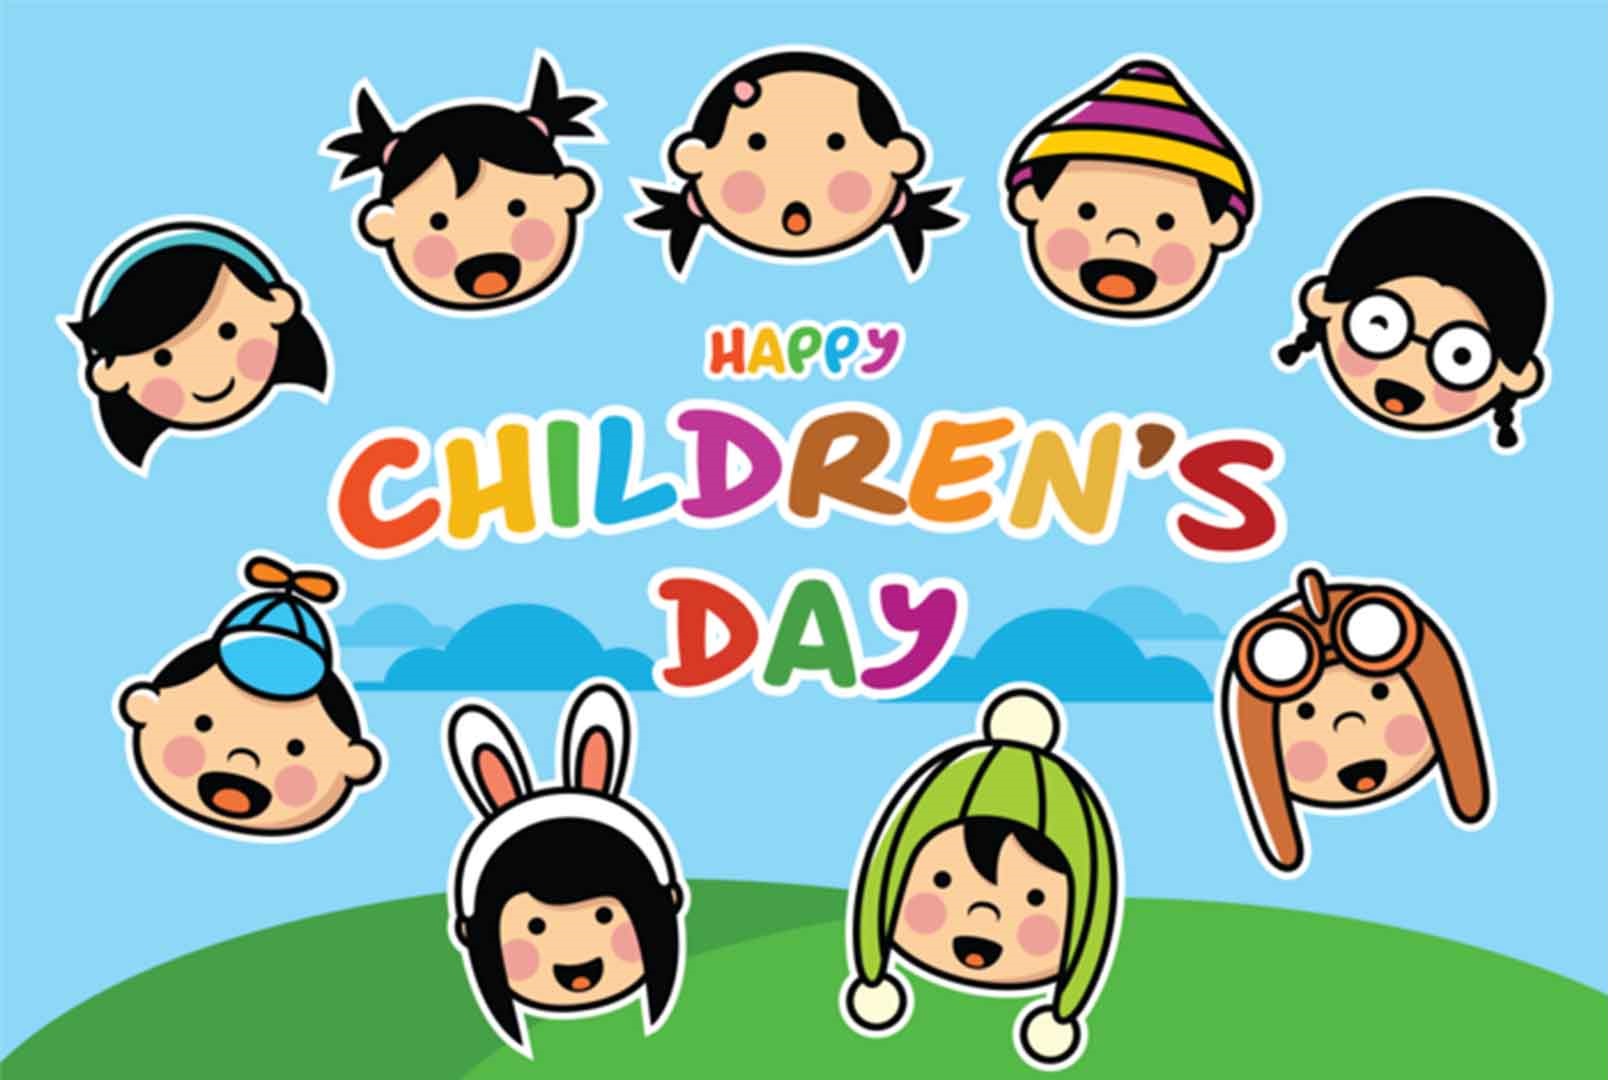 childrens day image hd 2017